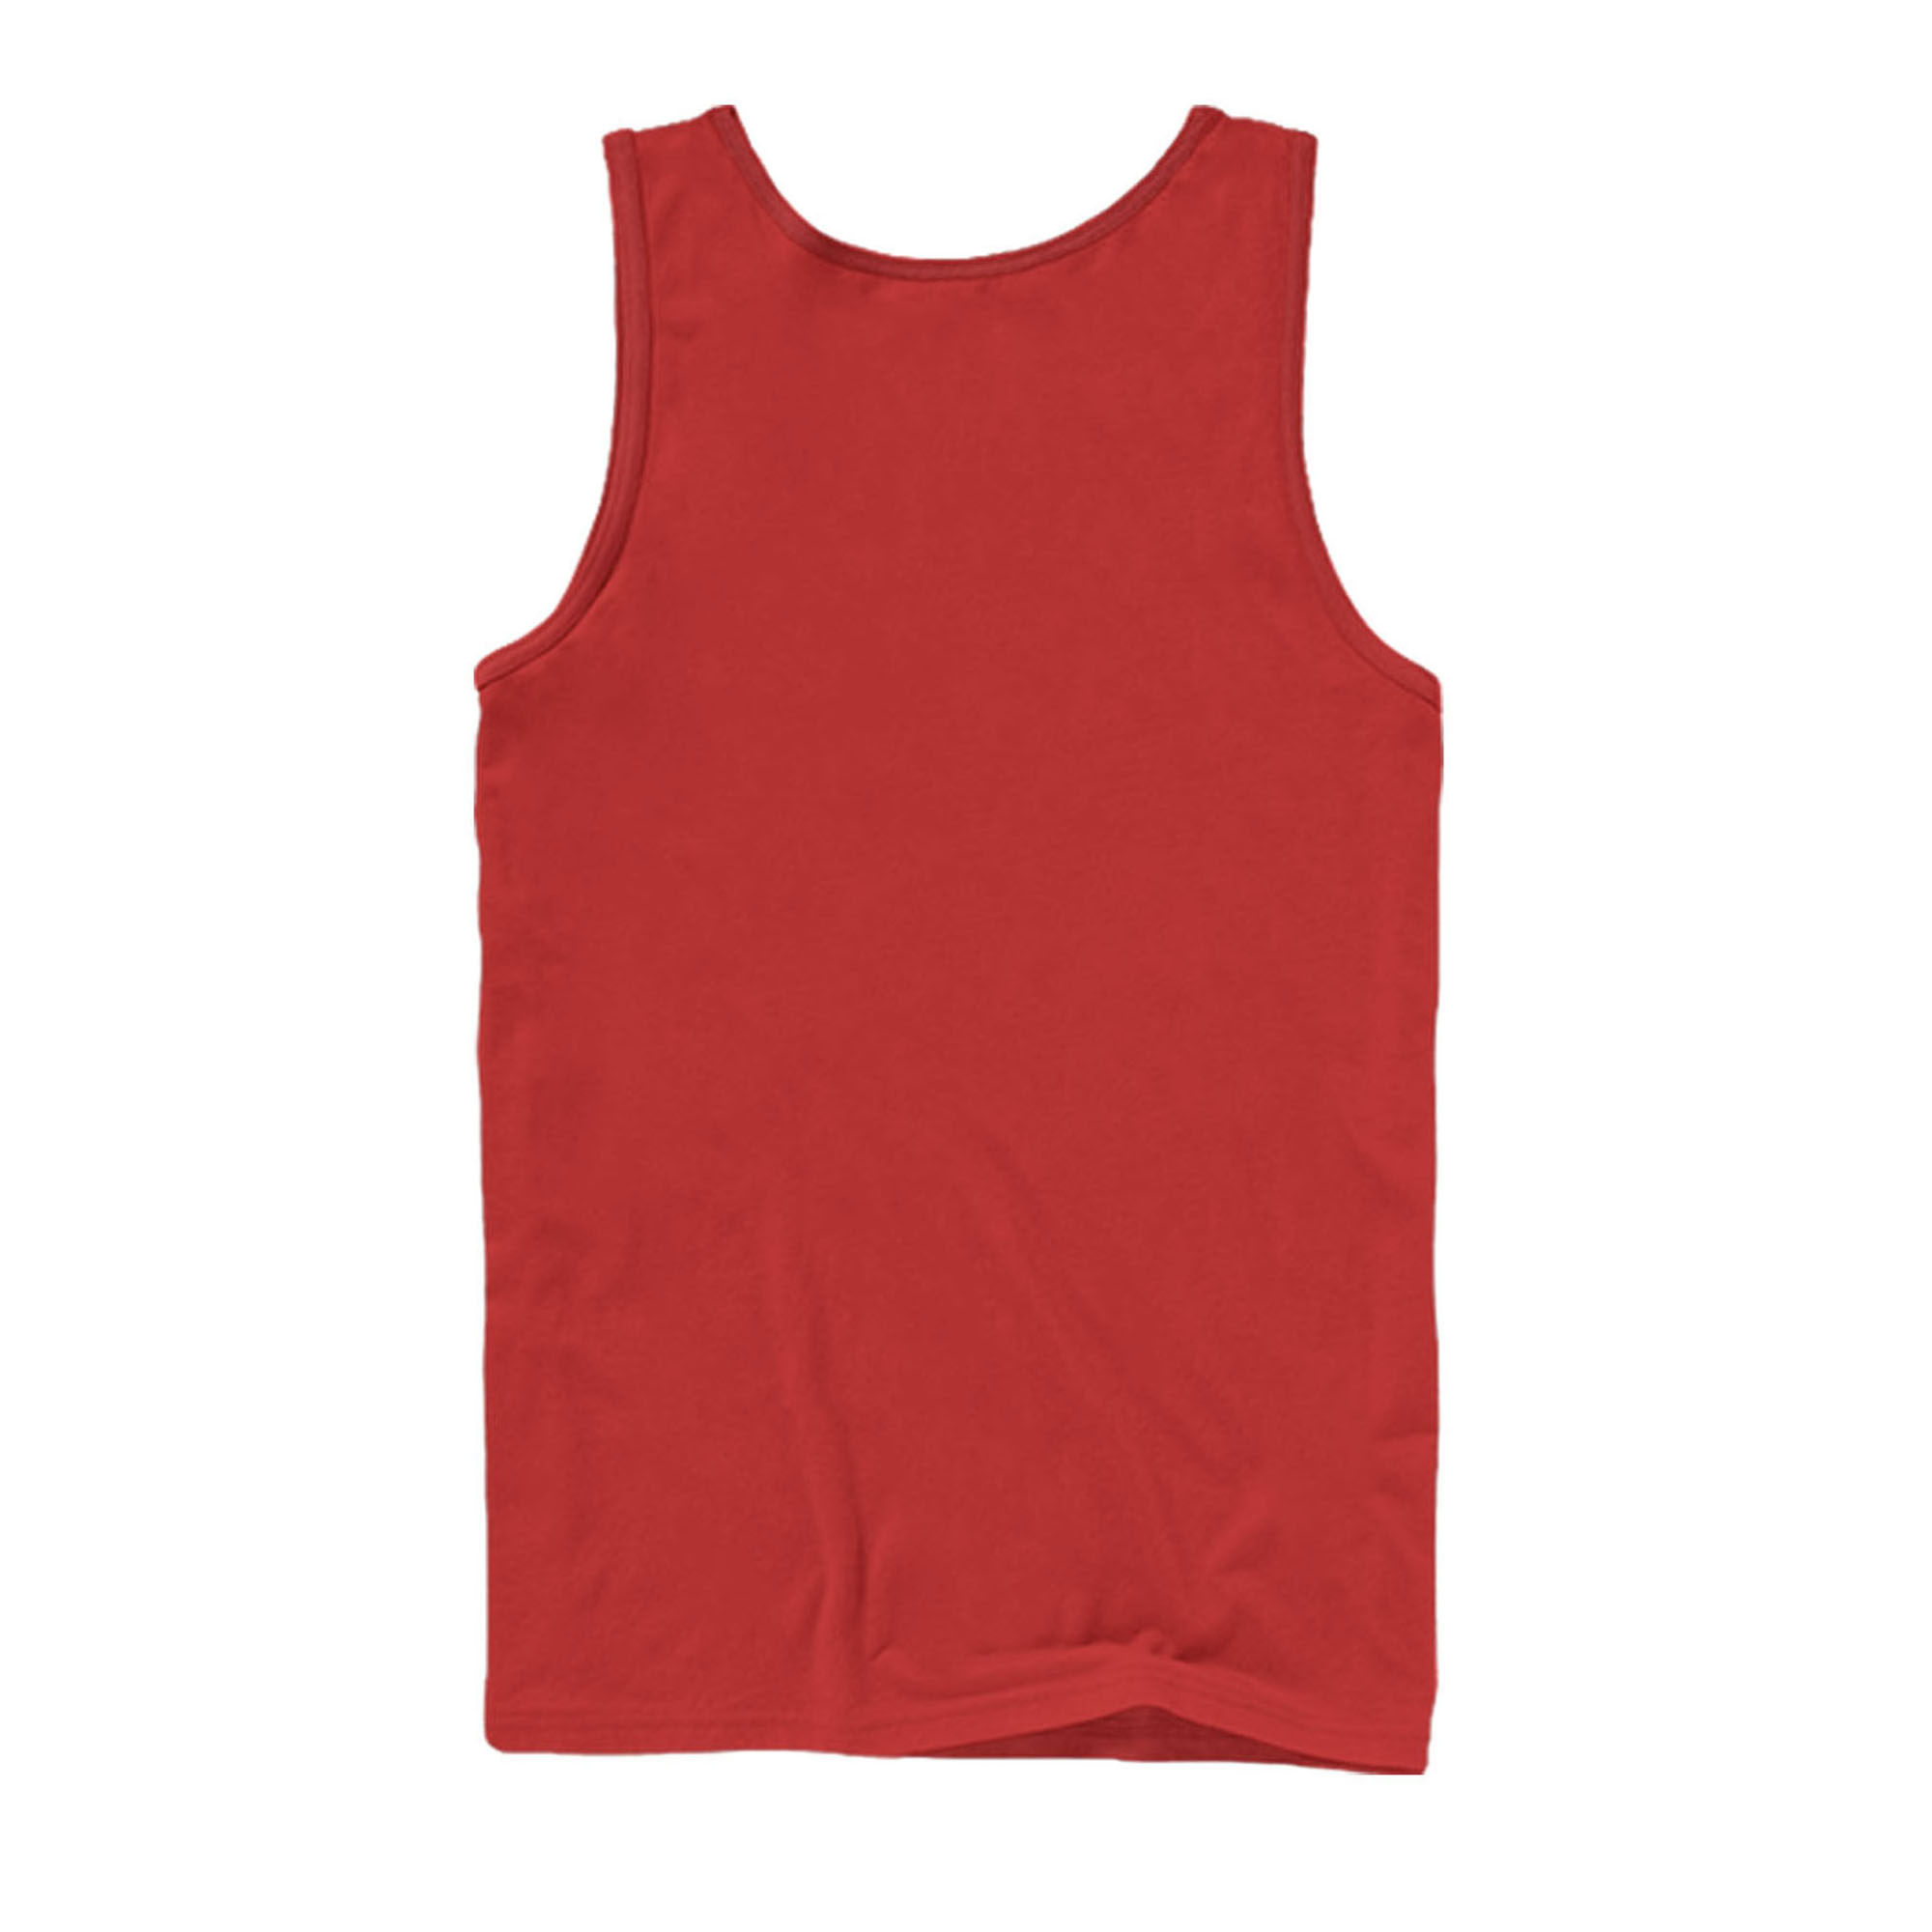 Maverick the Bald Eagle Mens Red Graphic Tank Top - Design By Humans  2XL - image 3 of 3